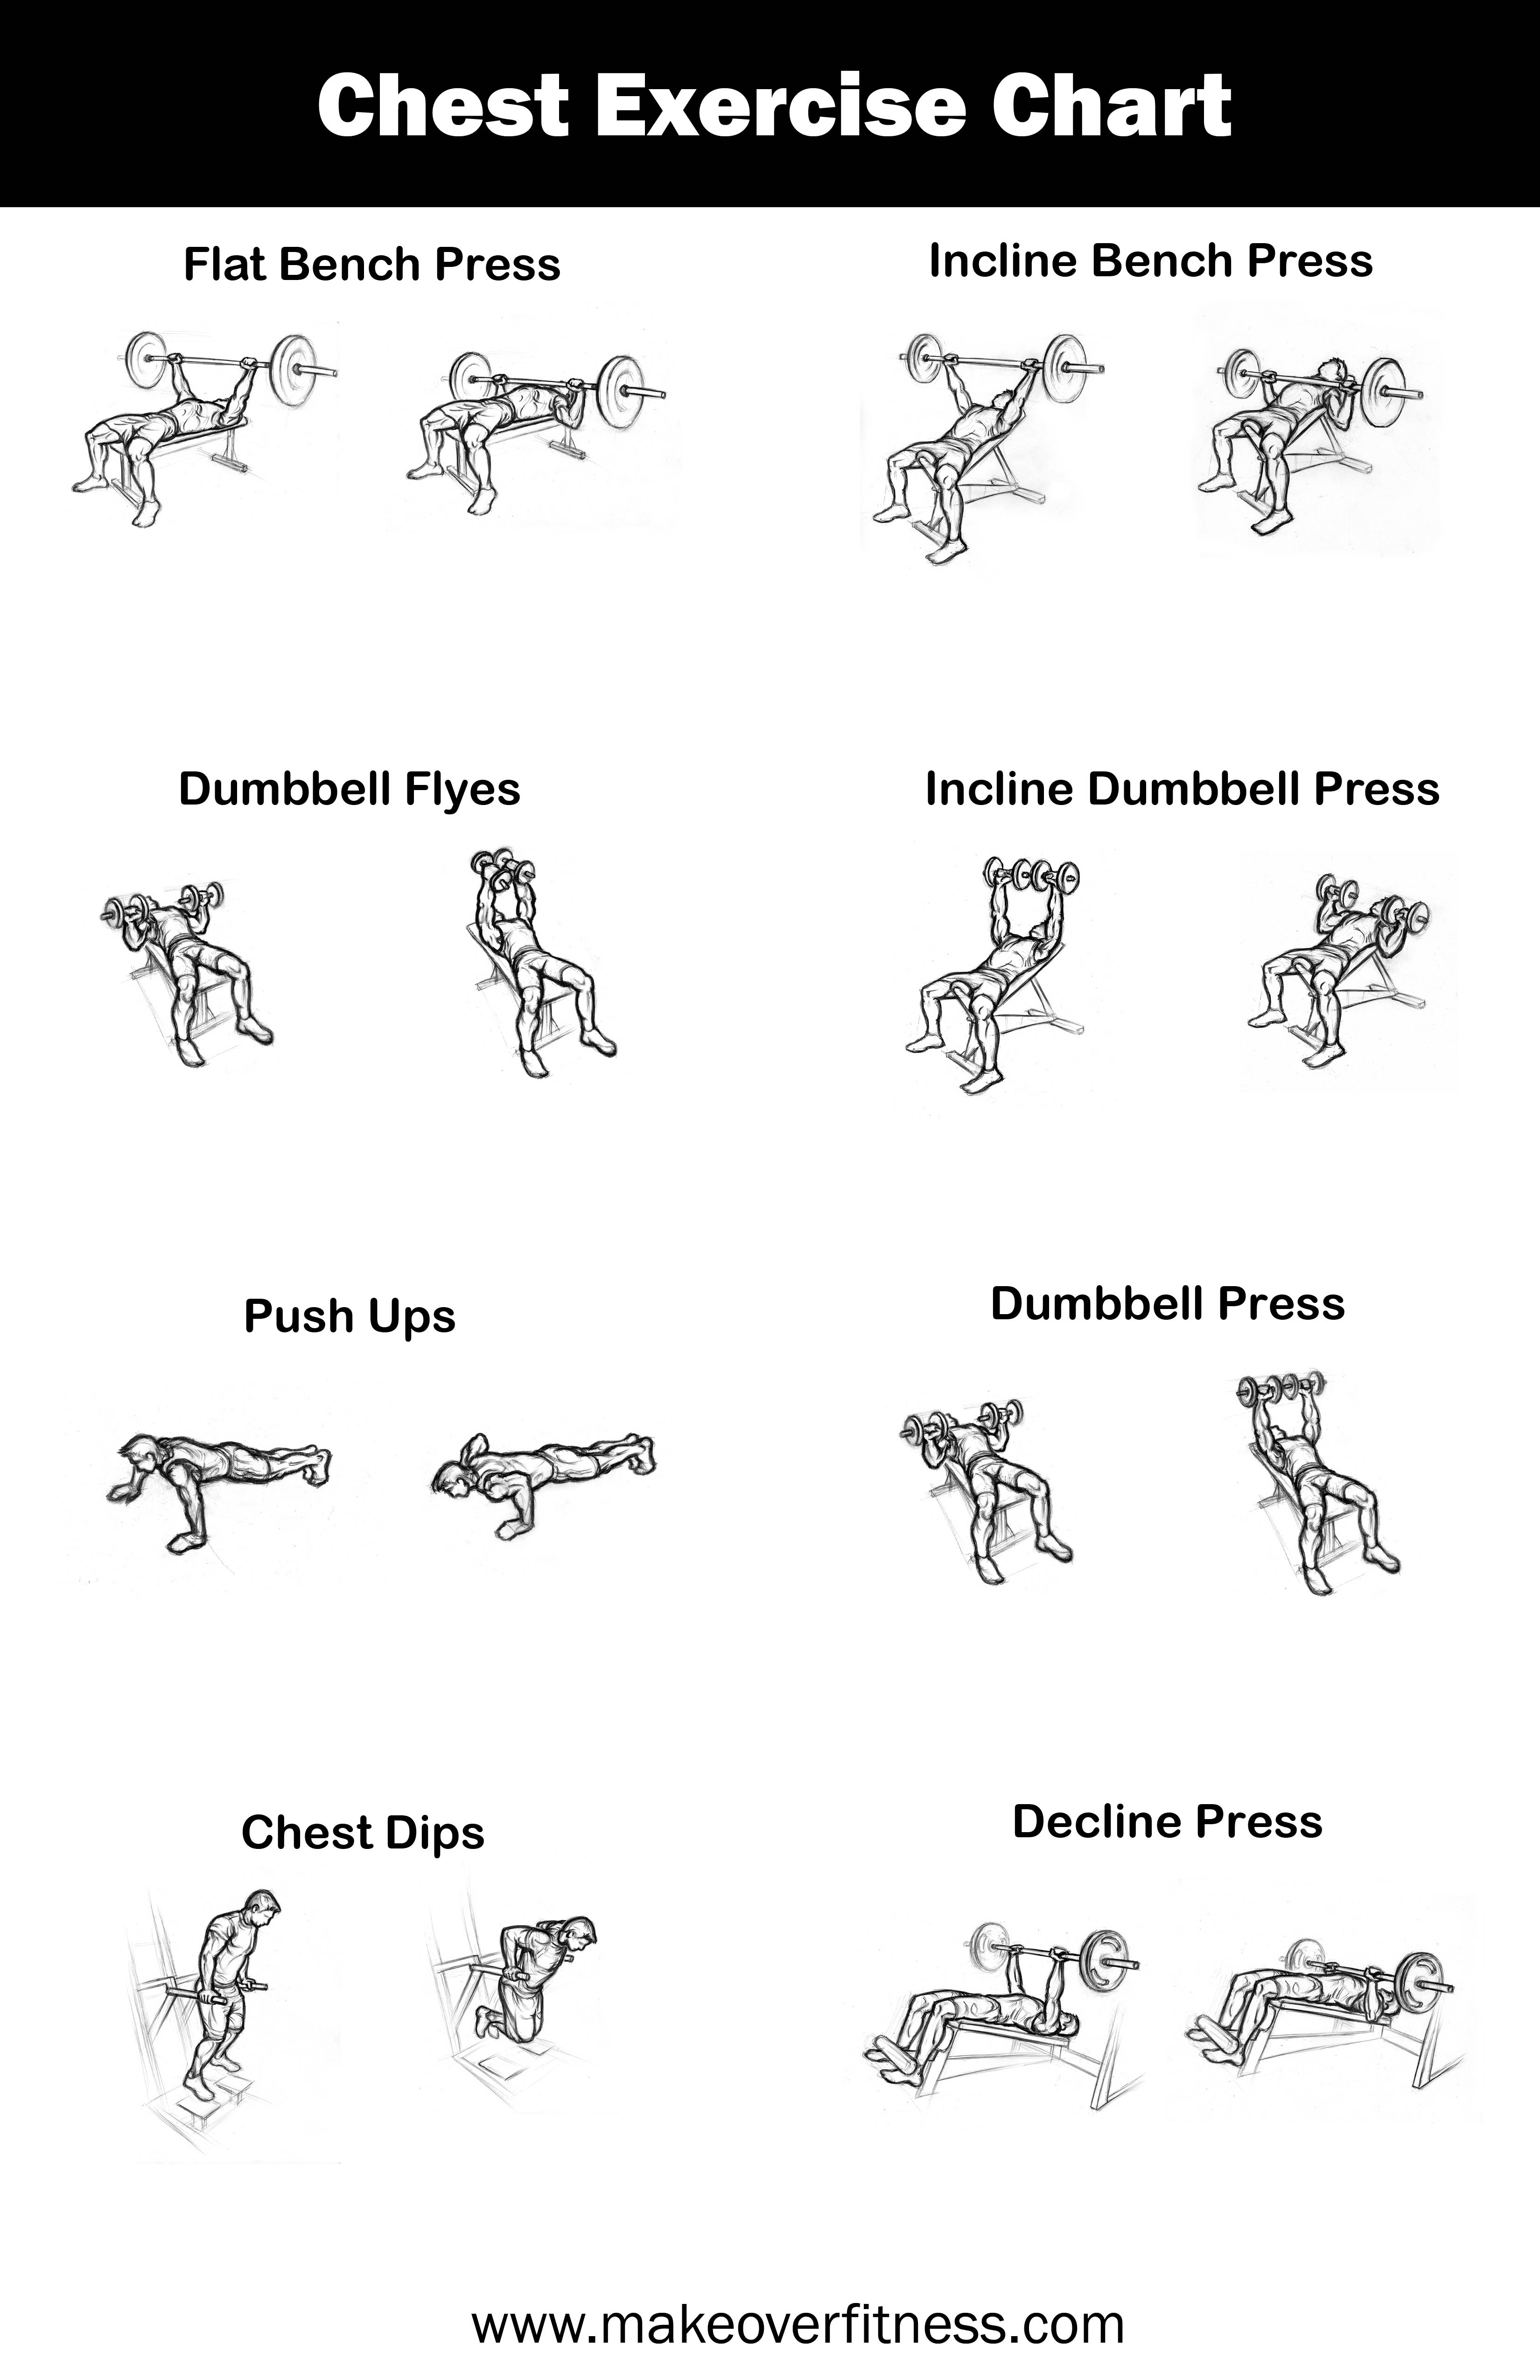 Chest Workout Routine for Women at home